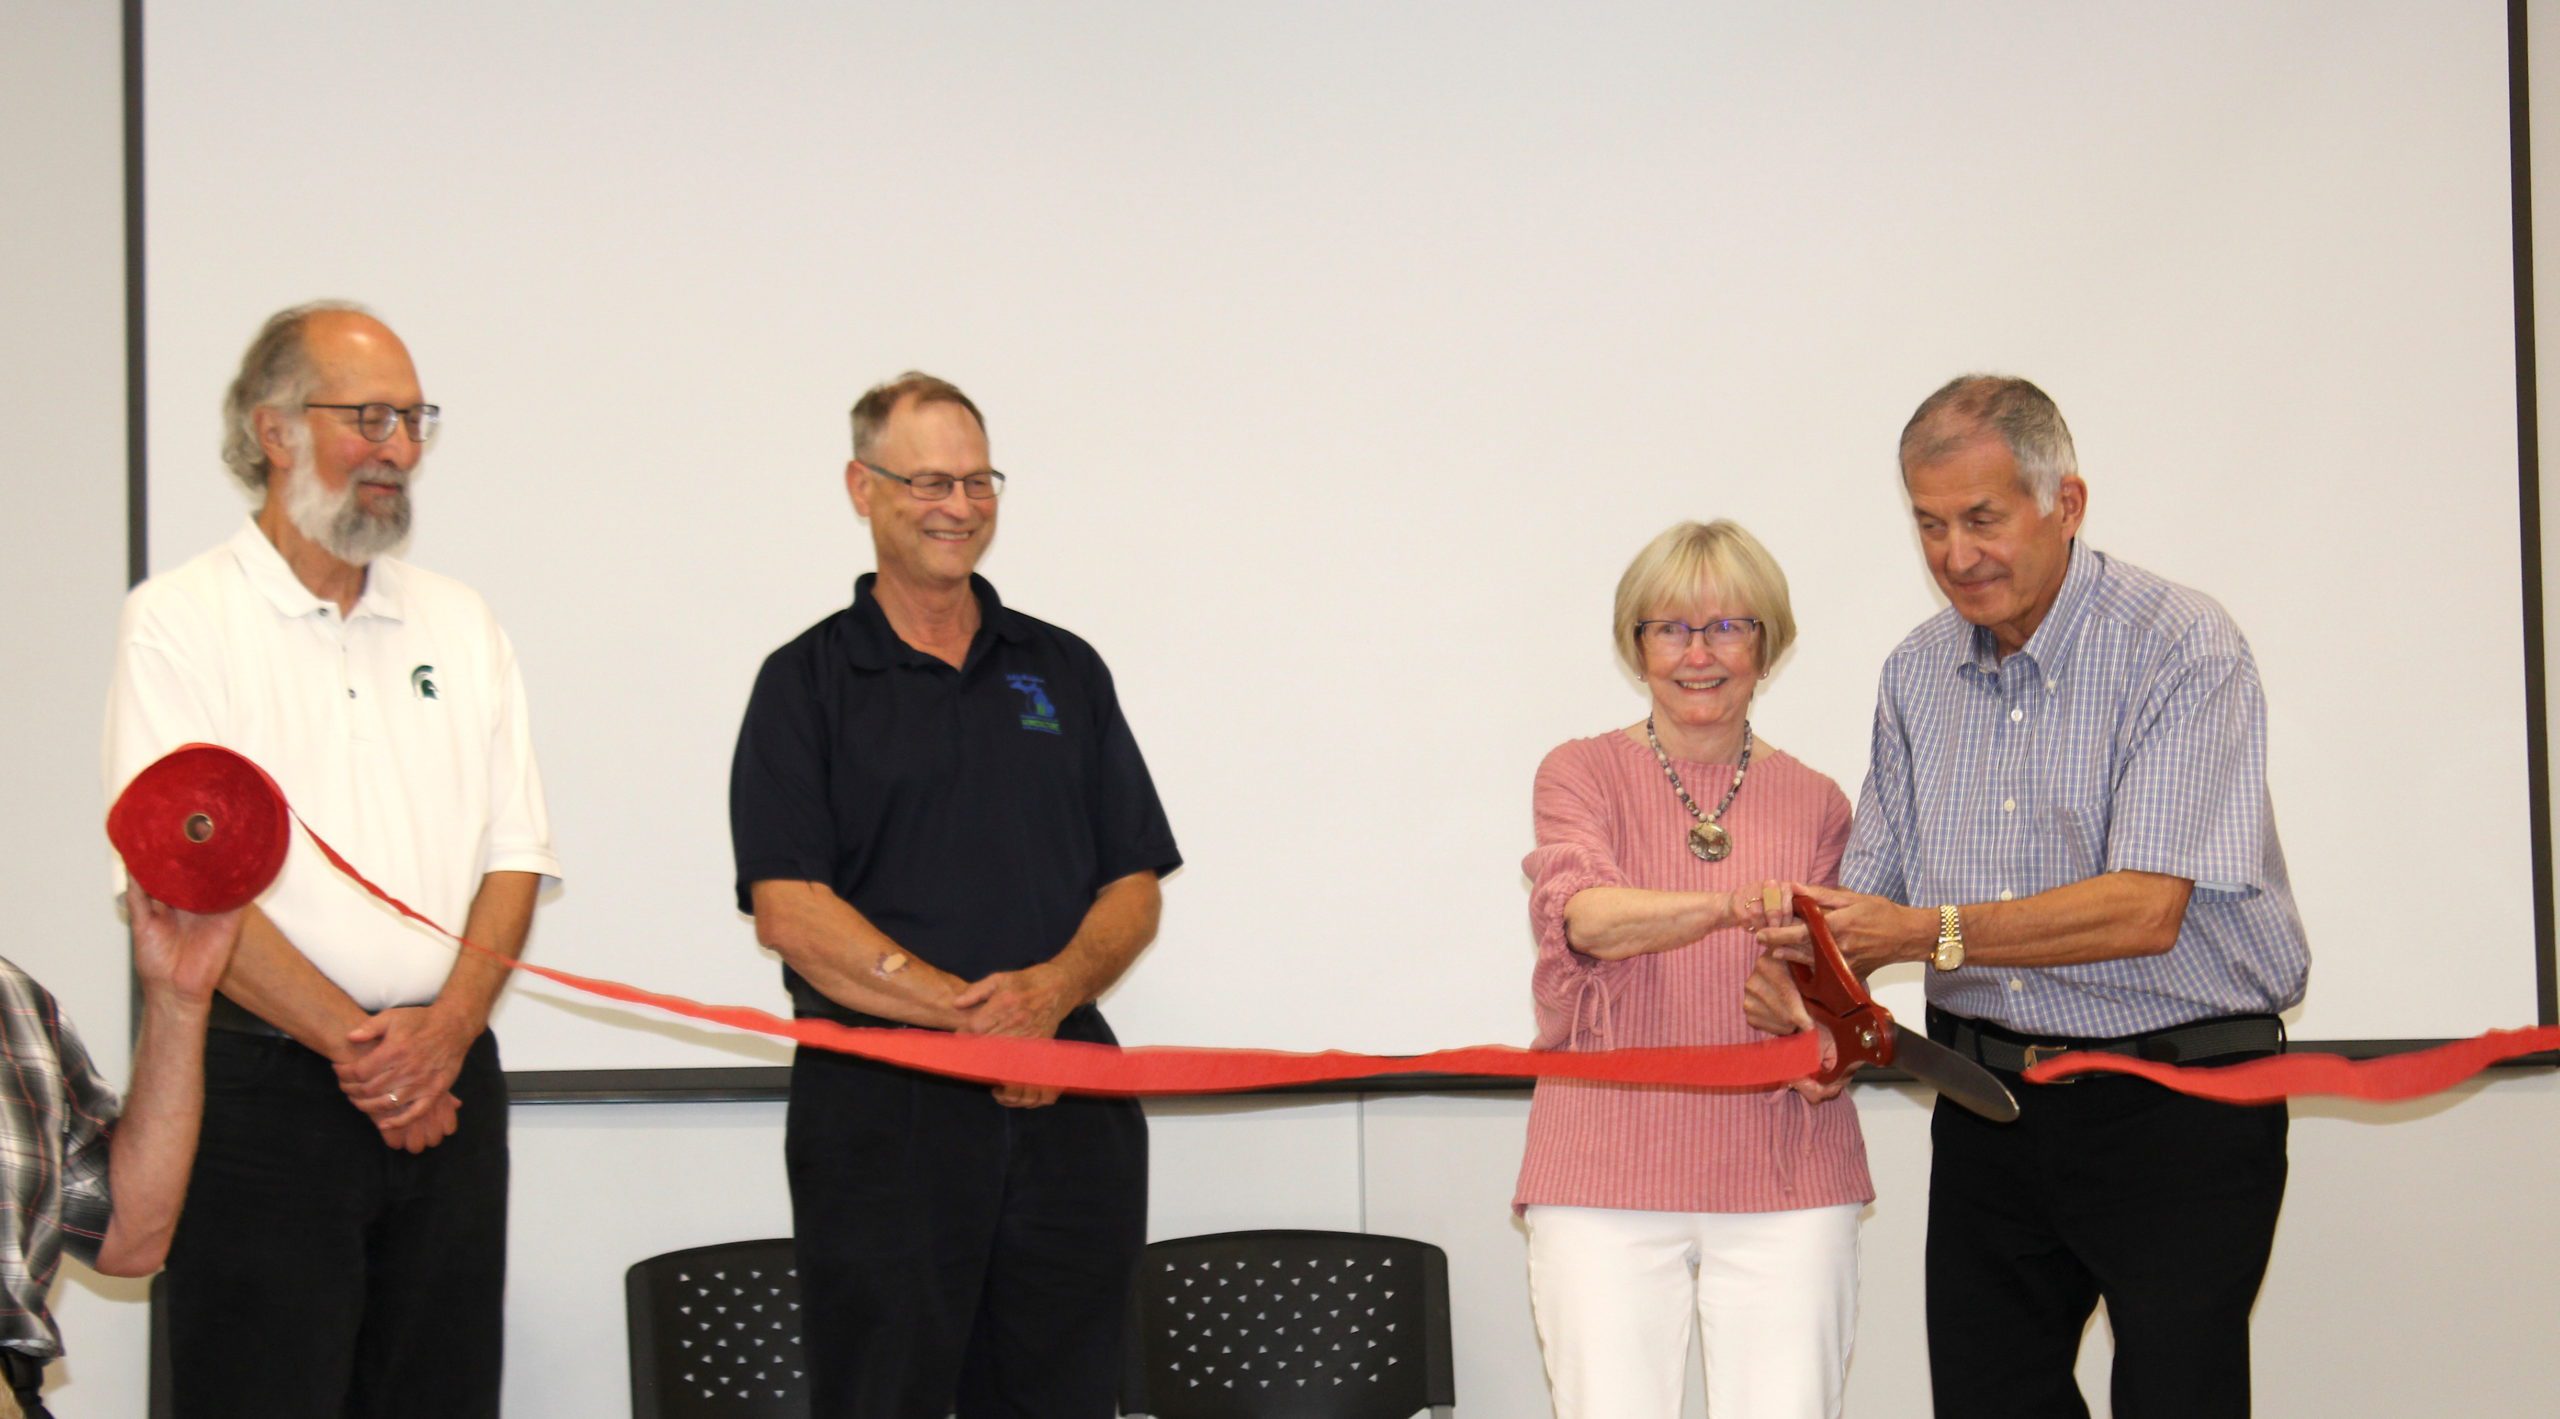 Earl and Linda Peterson cut the ribbon at the new research station that bears their name. with them are MSU’s Doug Buhler, left, and Michigan Department of Agriculture and Rural Development Director Gary McDowell.